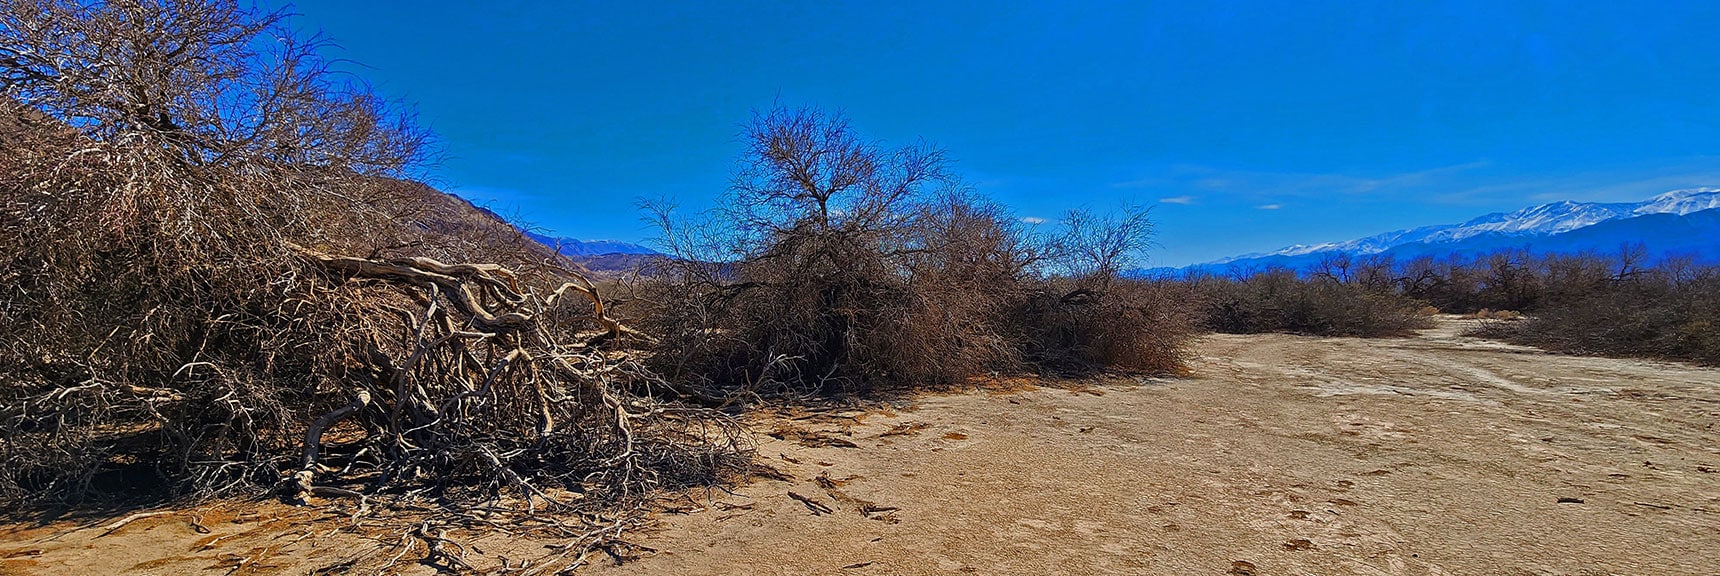 Inside the Mesquite Grove Looking South | Mesquite Grove | Death Valley, California | David Smith | Las Vegas Area Trails